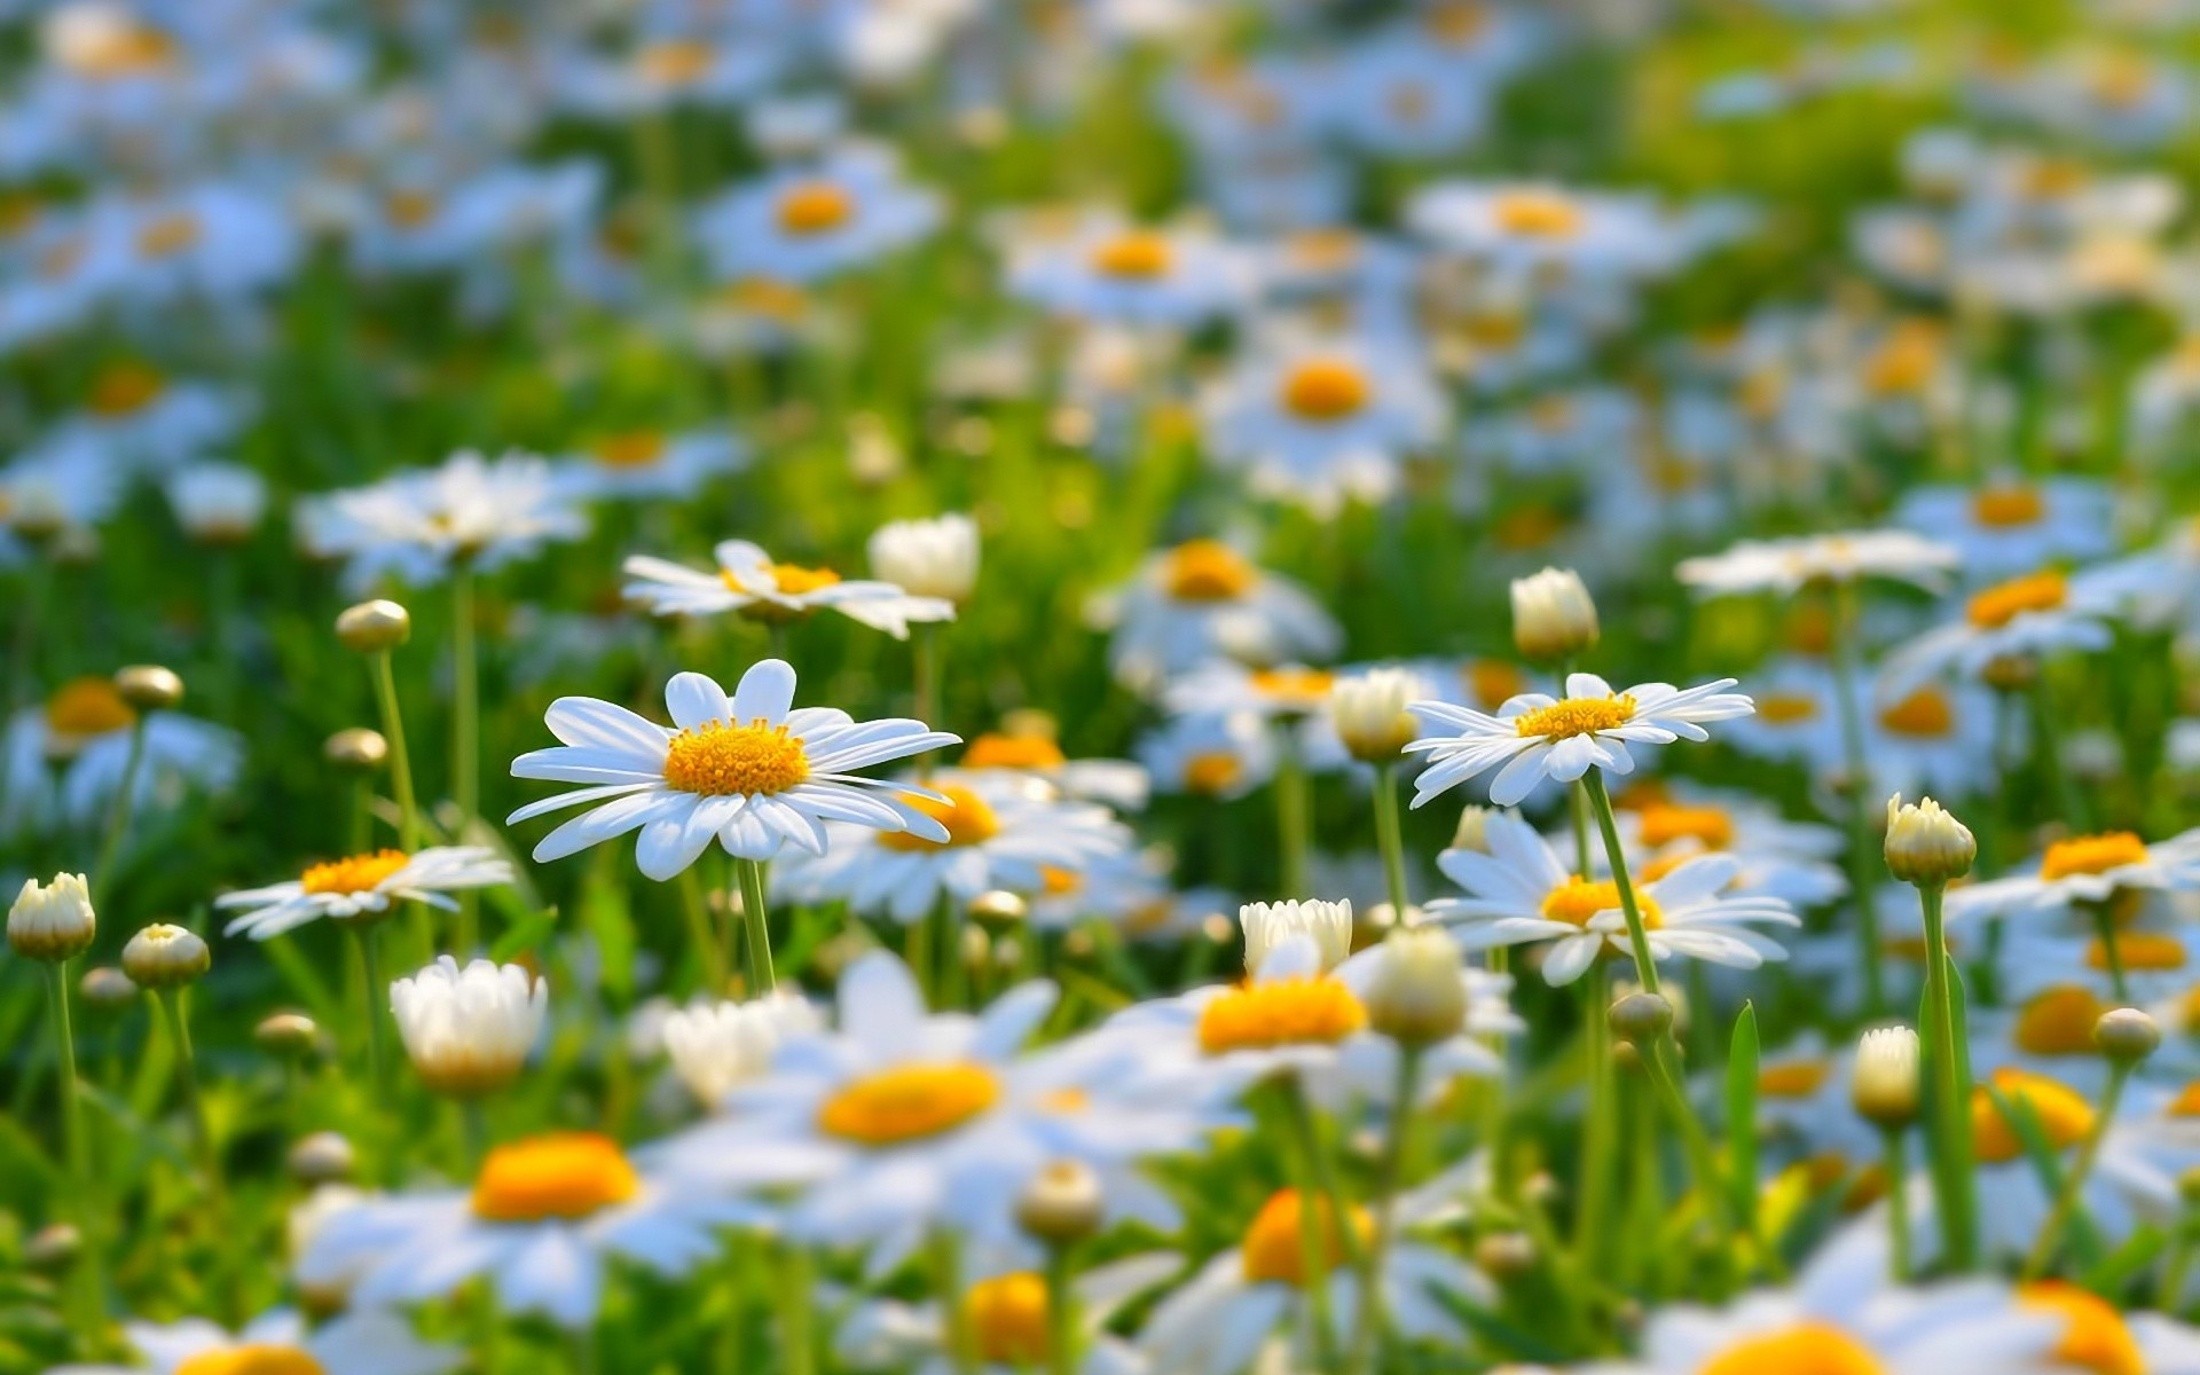 General 2200x1375 flowers summer depth of field grass vibrant chamomile outdoors nature